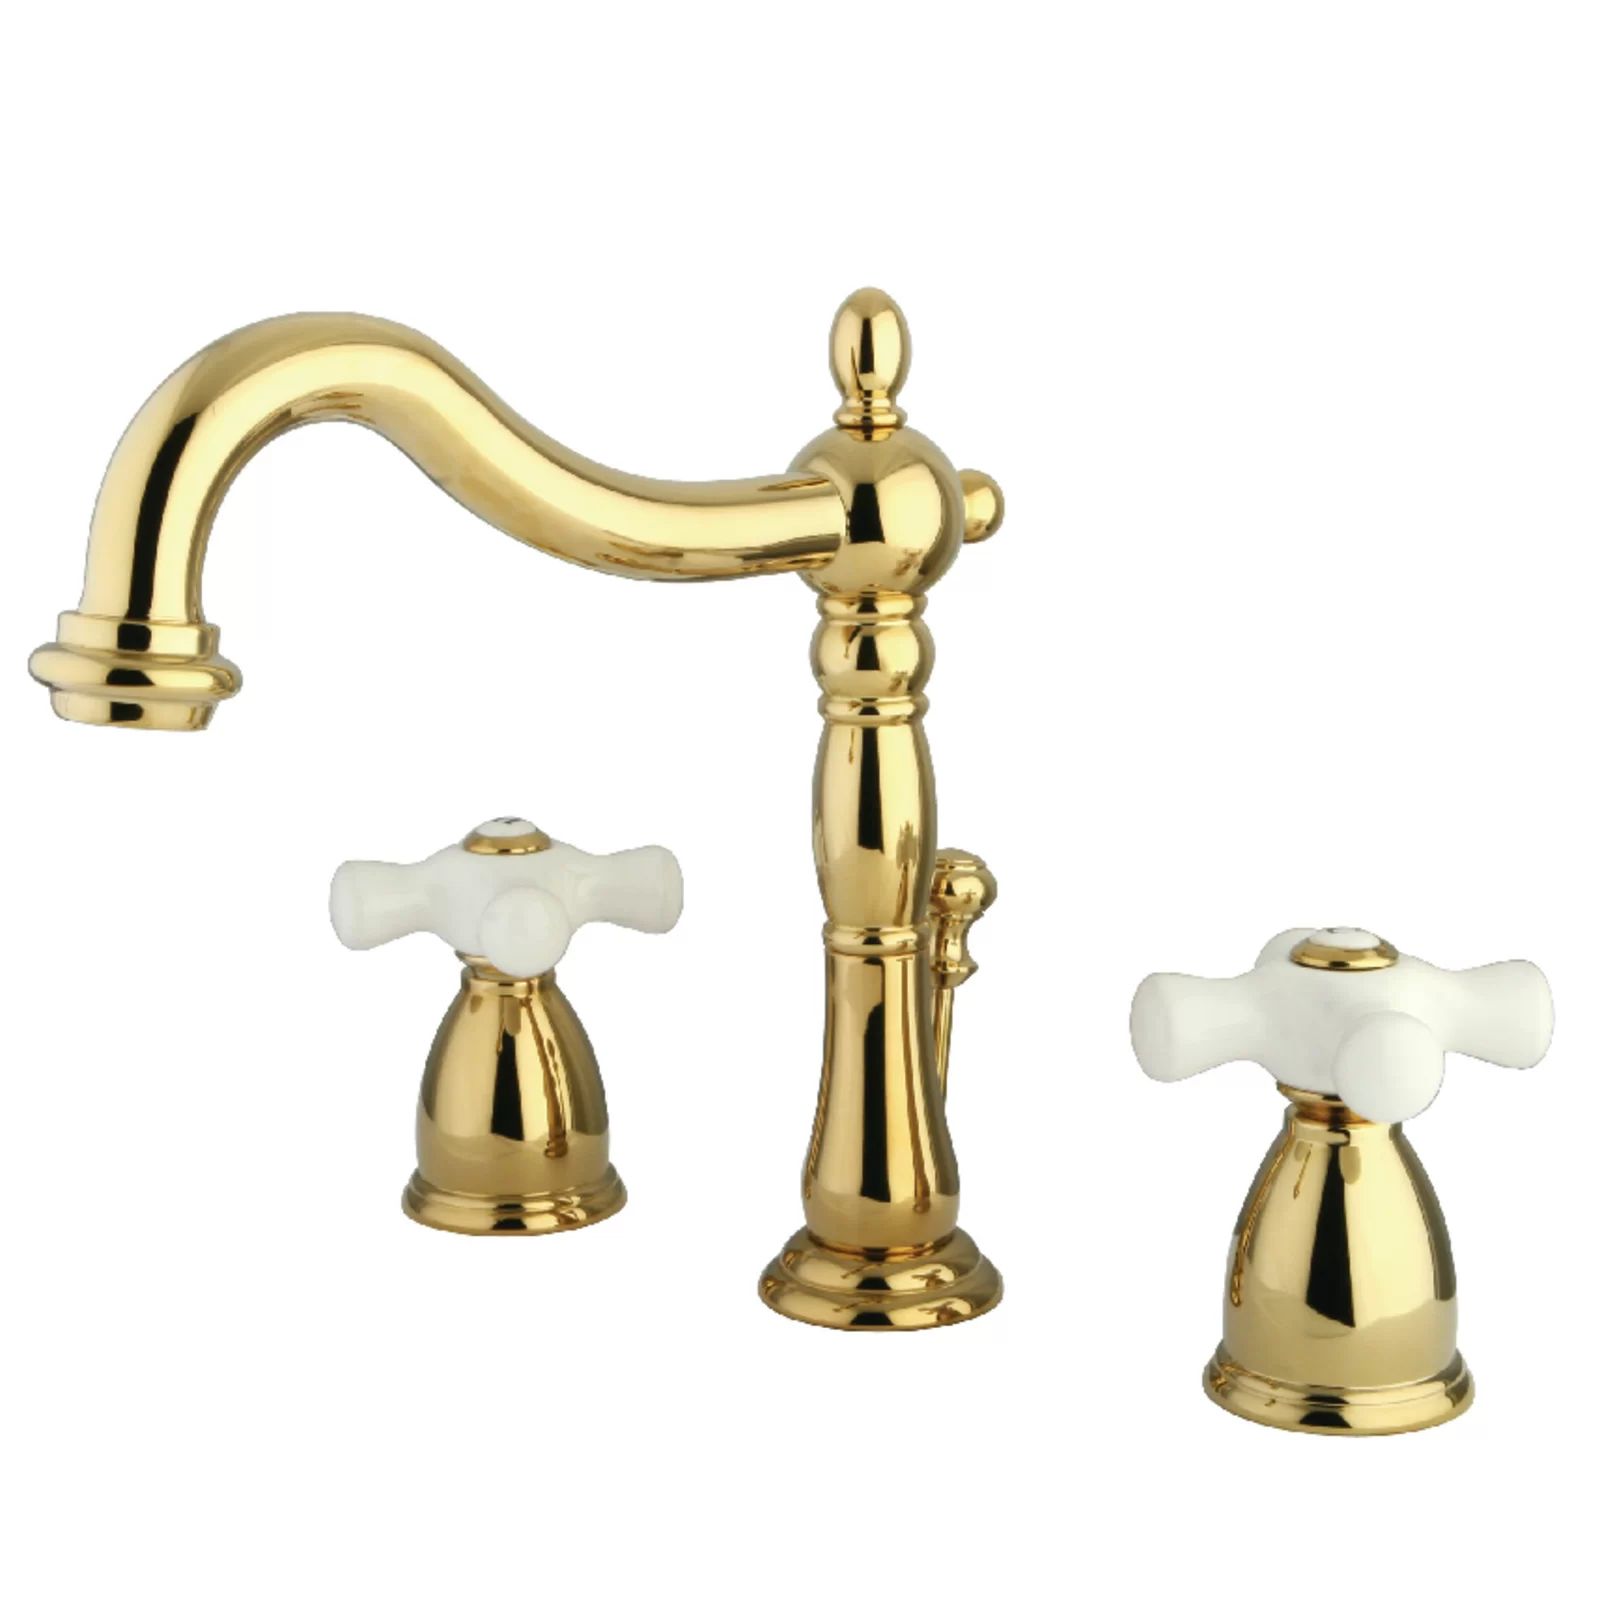 Heritage Kingston Brass Widespread Bathroom Faucet with Drain Assembly | Wayfair North America